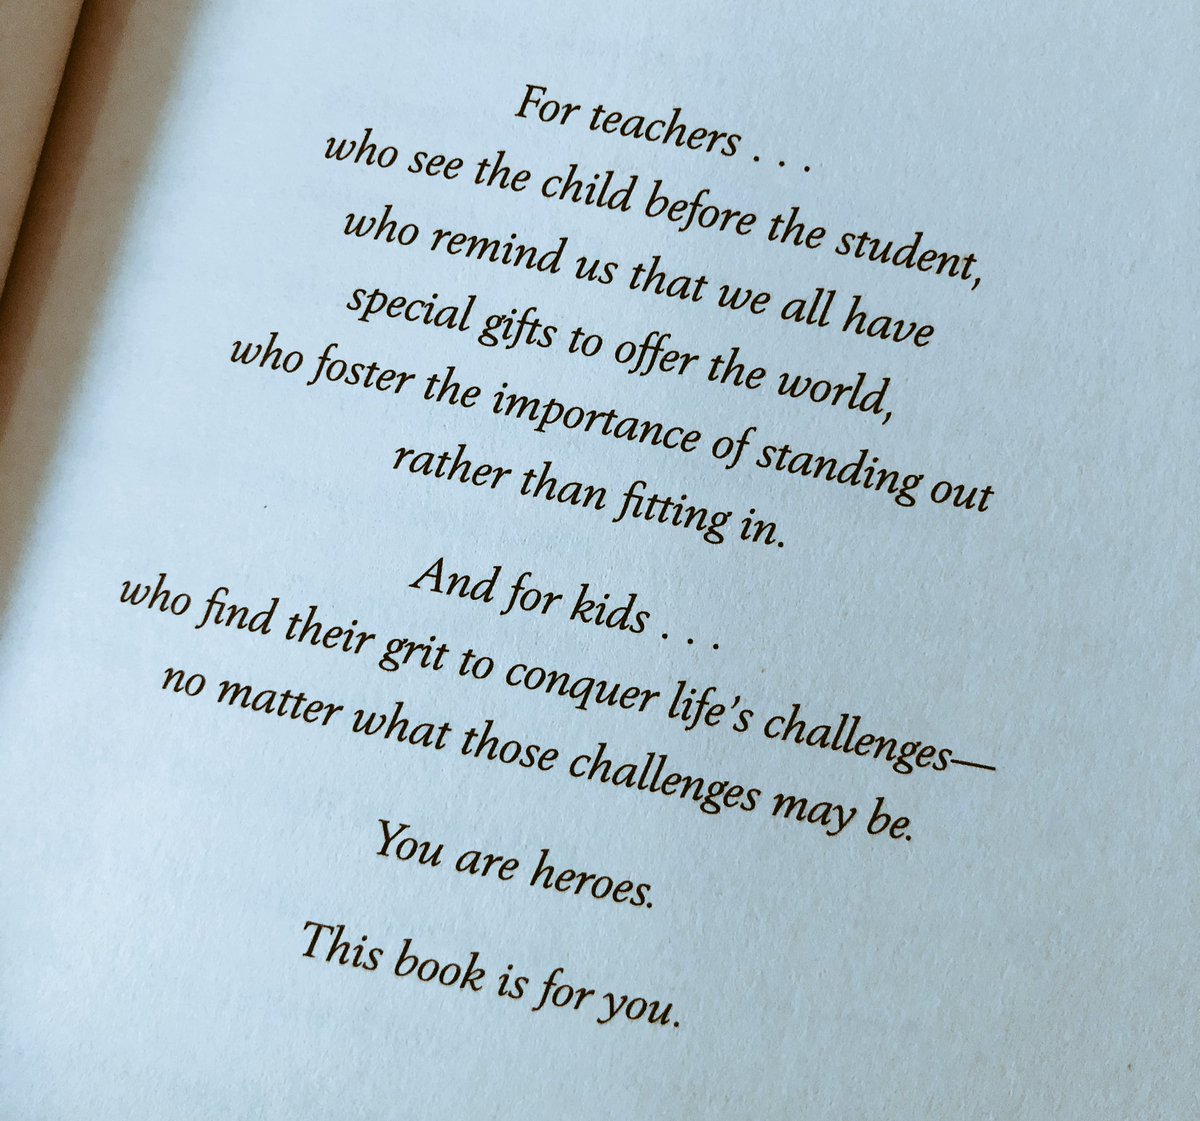 You know it’s going to be a good book when the dedication makes you cry. I hope to always be the teacher who sees the child before the student and inspire each one to chase their dreams and set the world on fire! 🐠🌲 #fishinatree #kidsdeserveit #sparksinthedark #whitecomagic